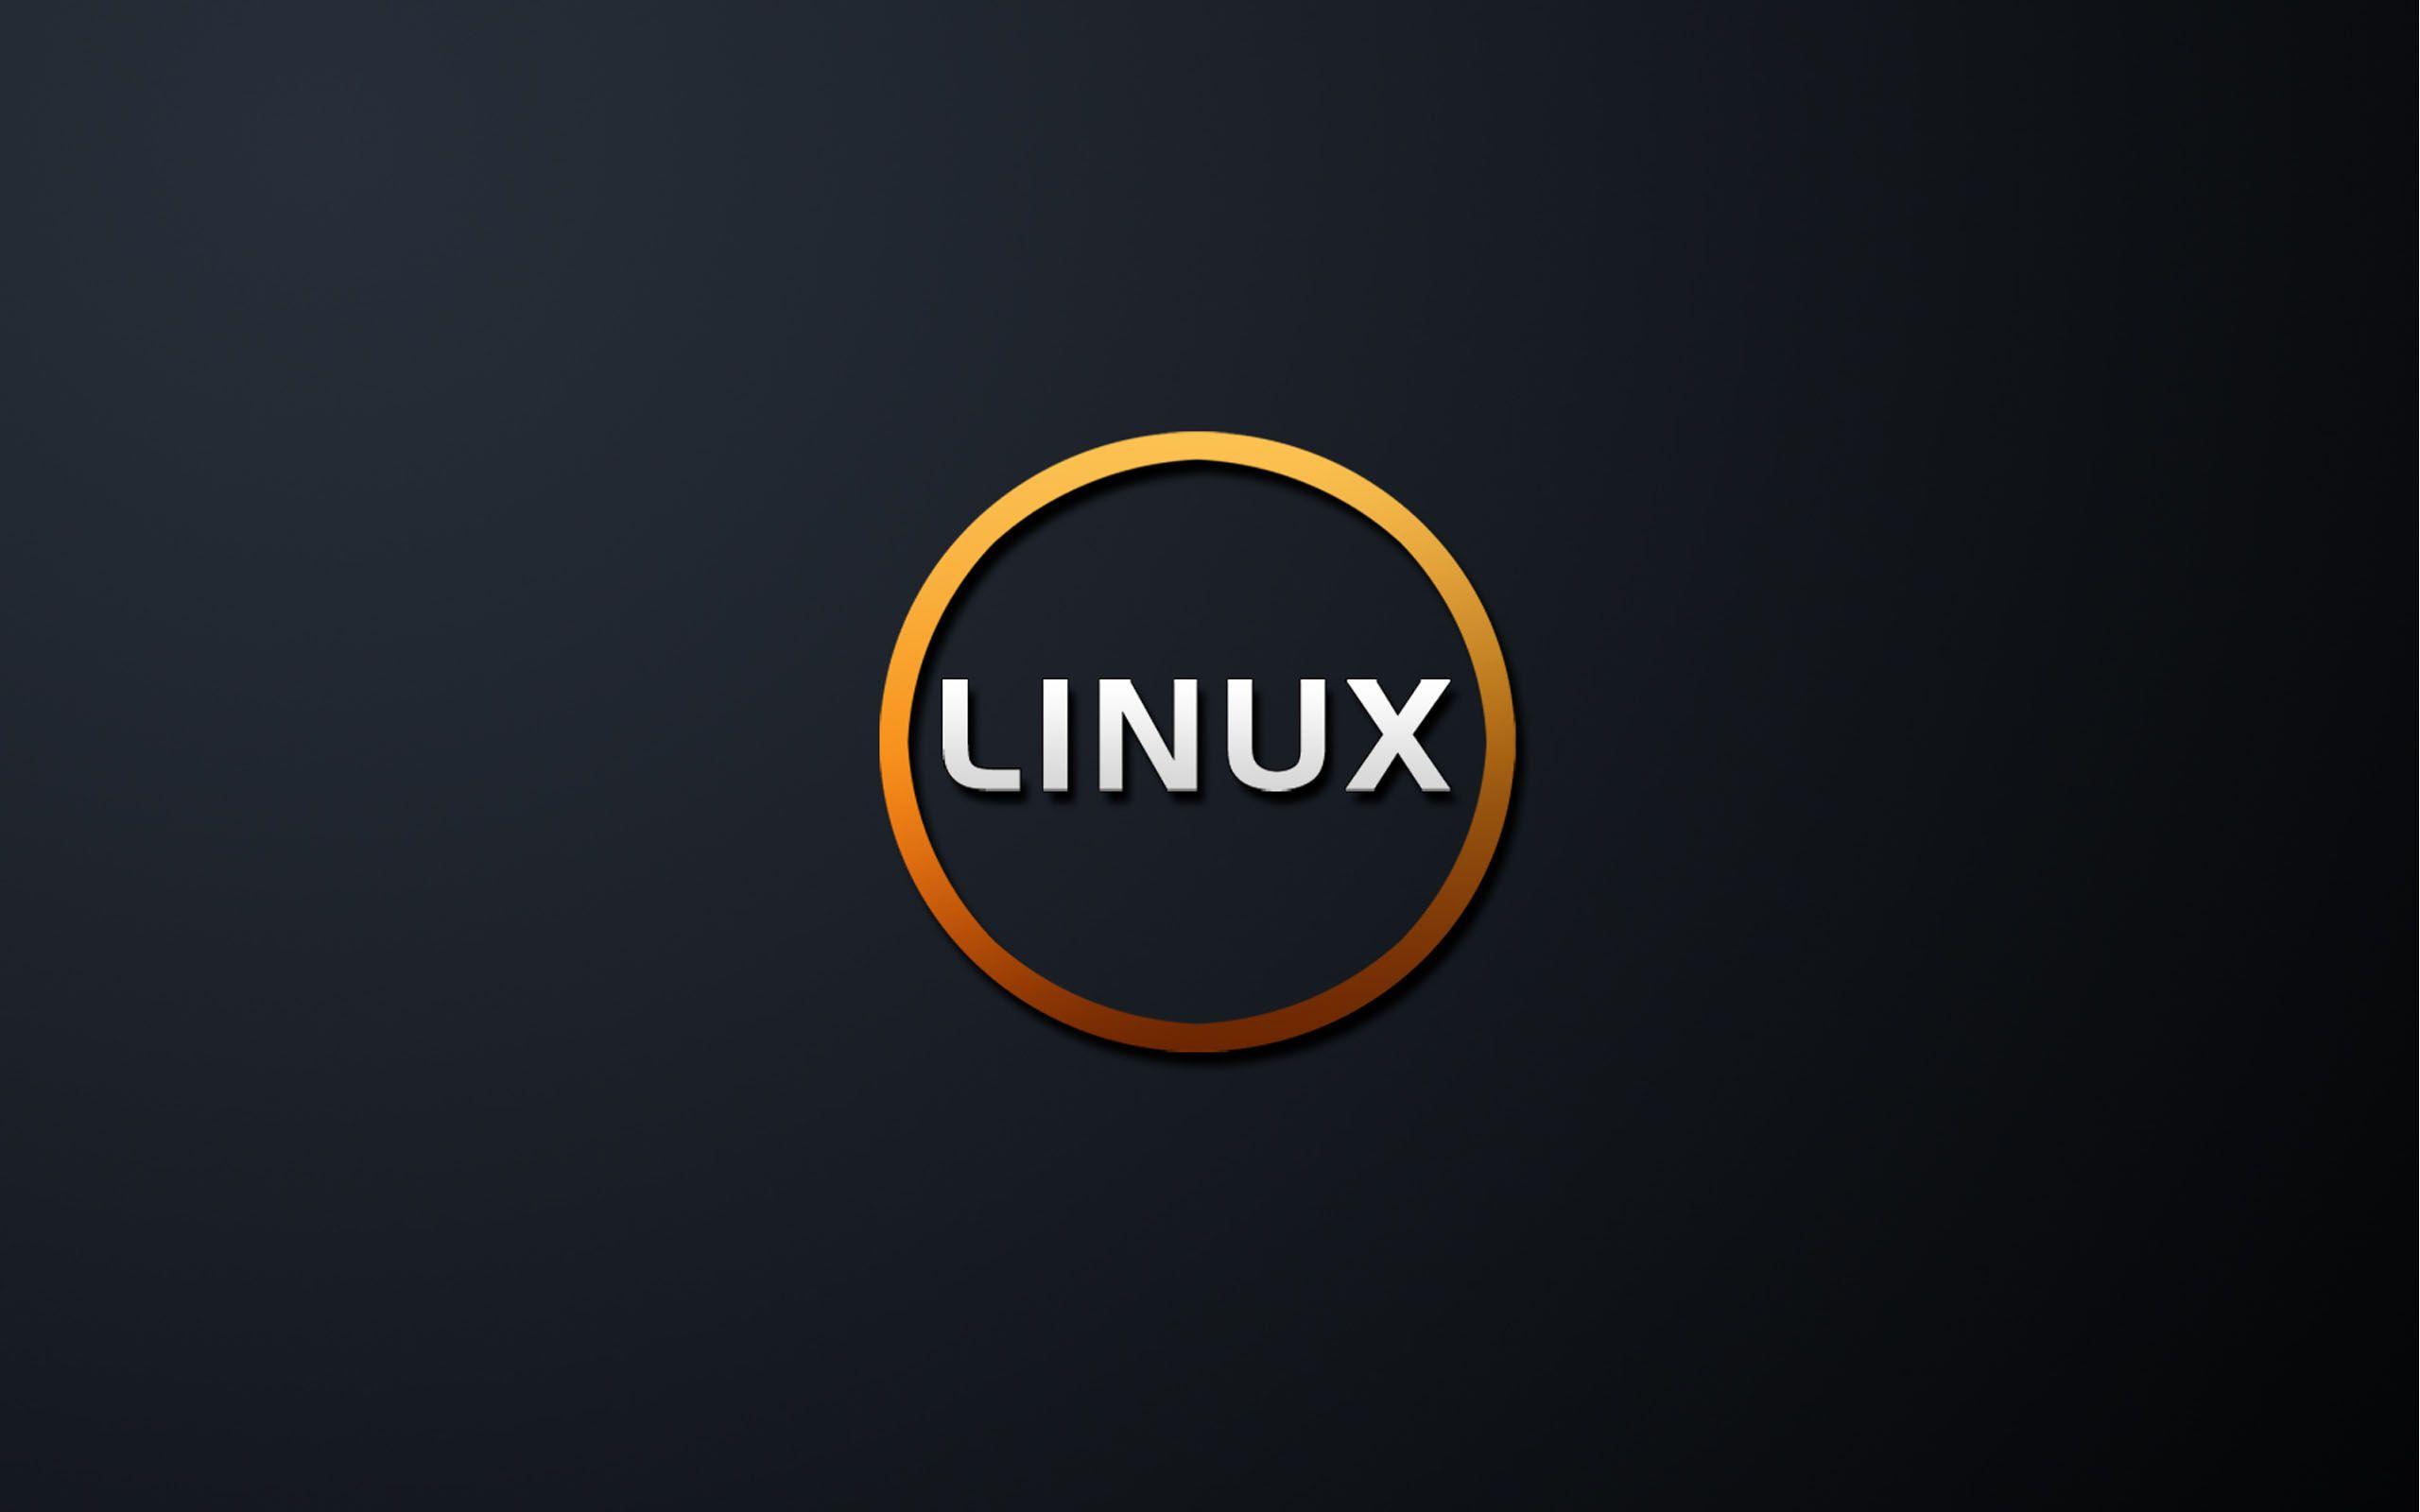 Animated Wallpaper on Linux